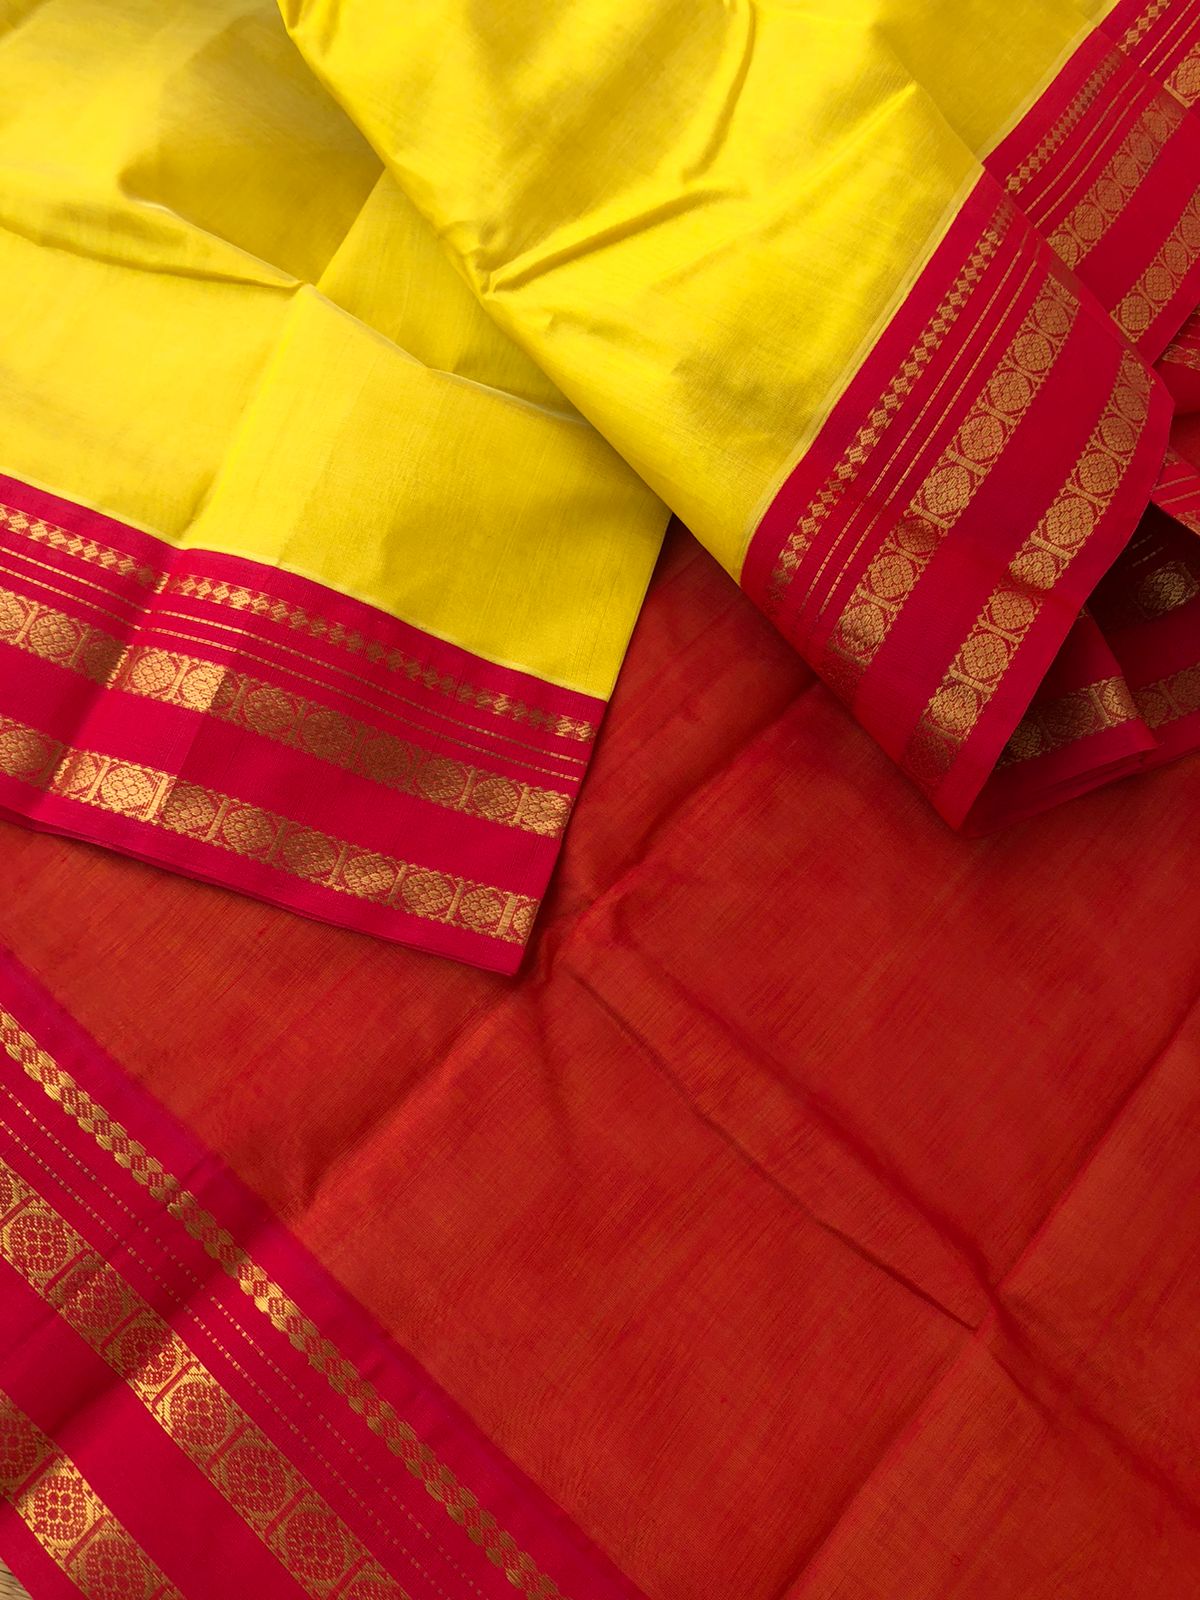 Korvai Silk Cotton - yellow and red